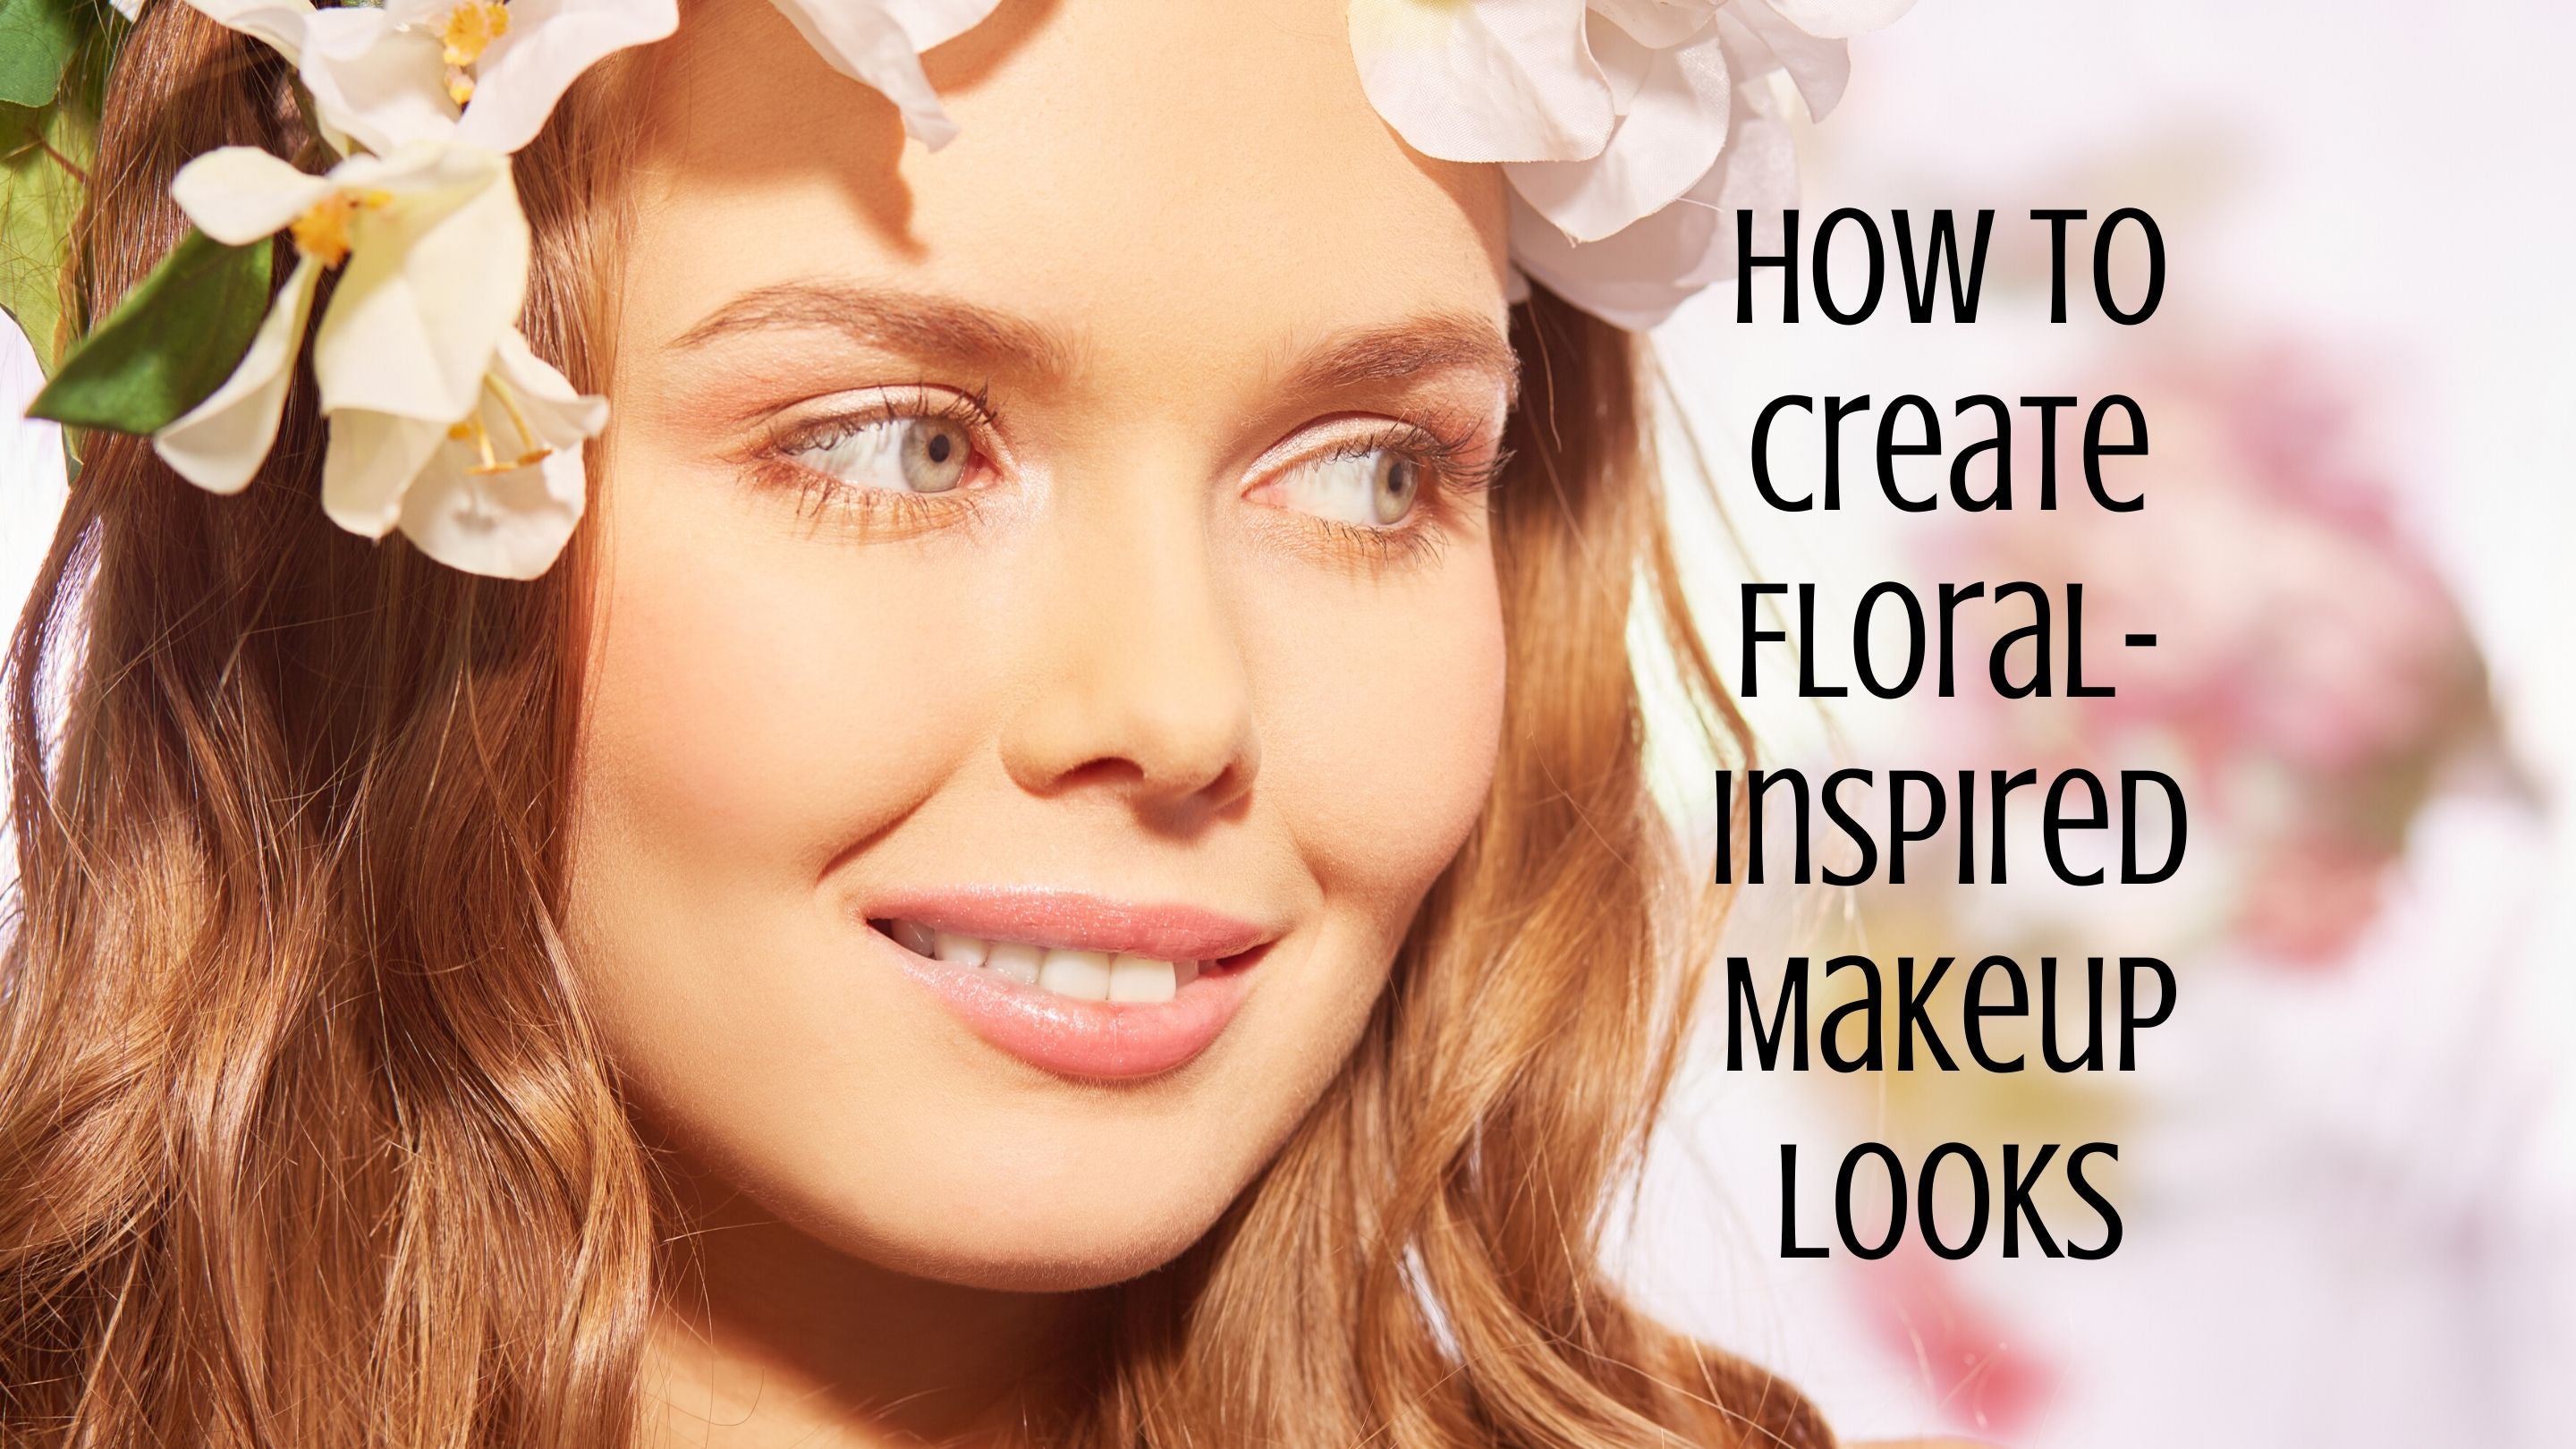 How to Create Floral-Inspired Makeup Looks